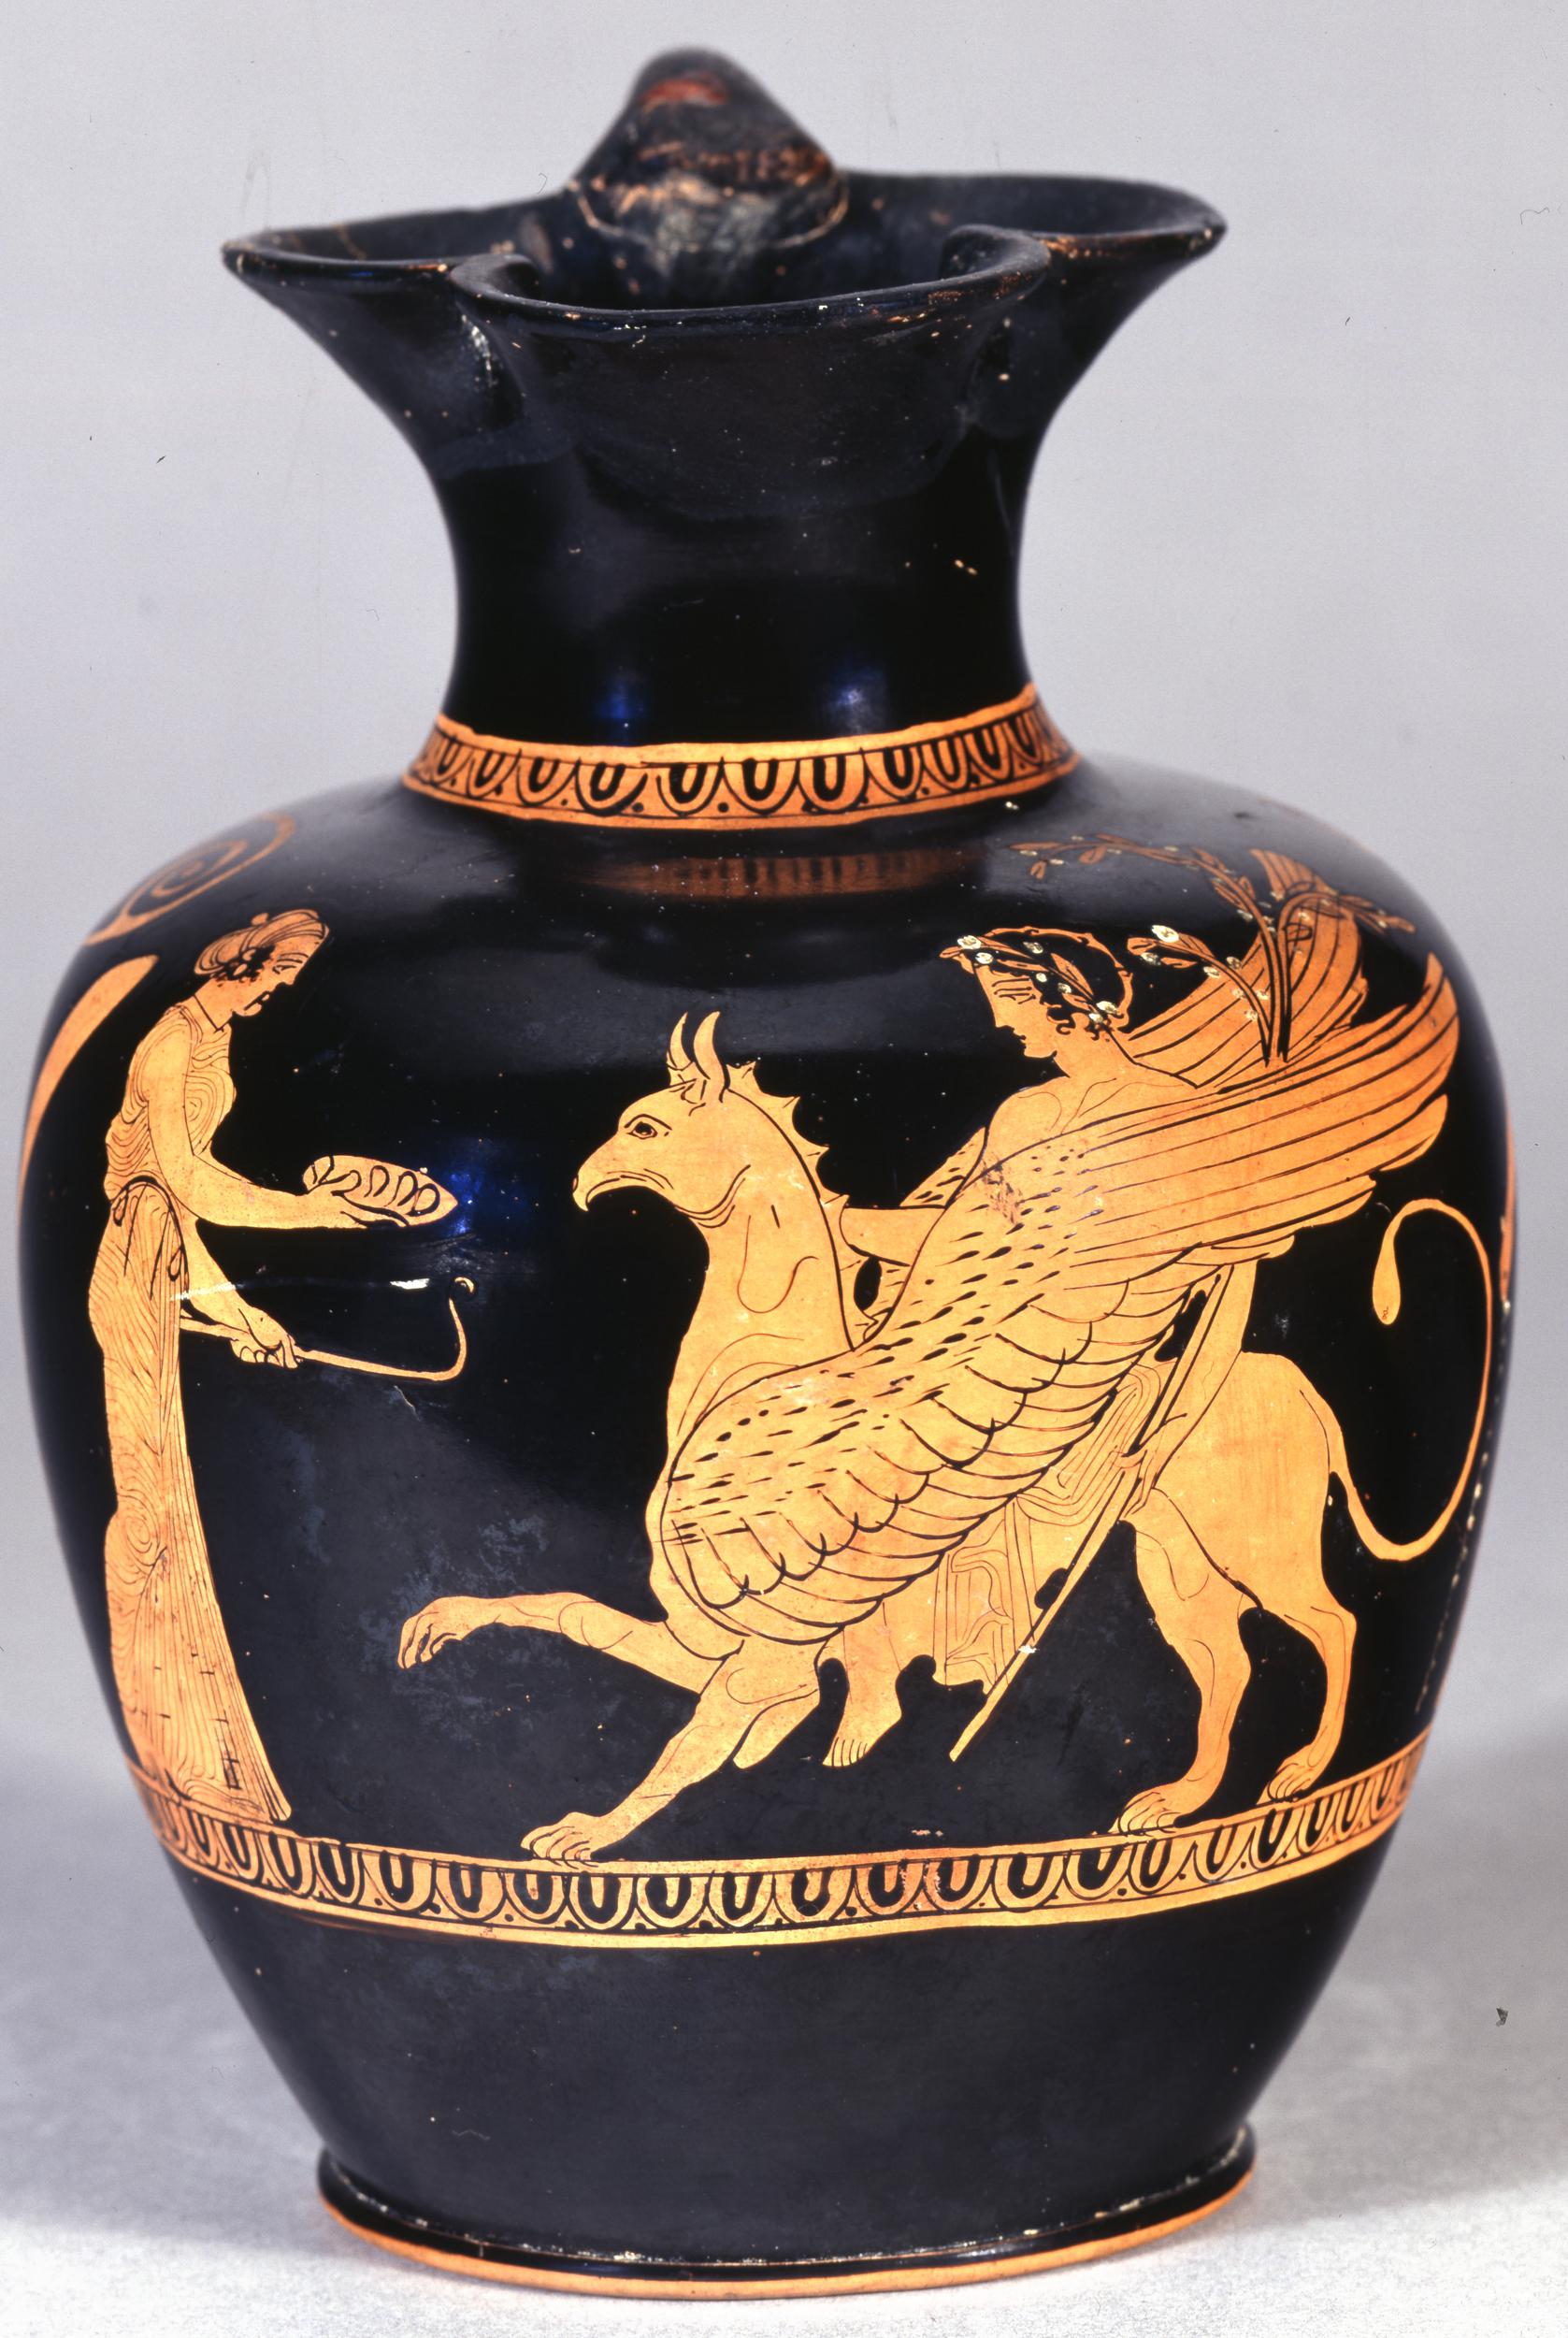 On the right Apollo, wearing laurels, rides a winged griffin. In front of him stands Artemis, richly dressed, holding a phiale out to Apollo.